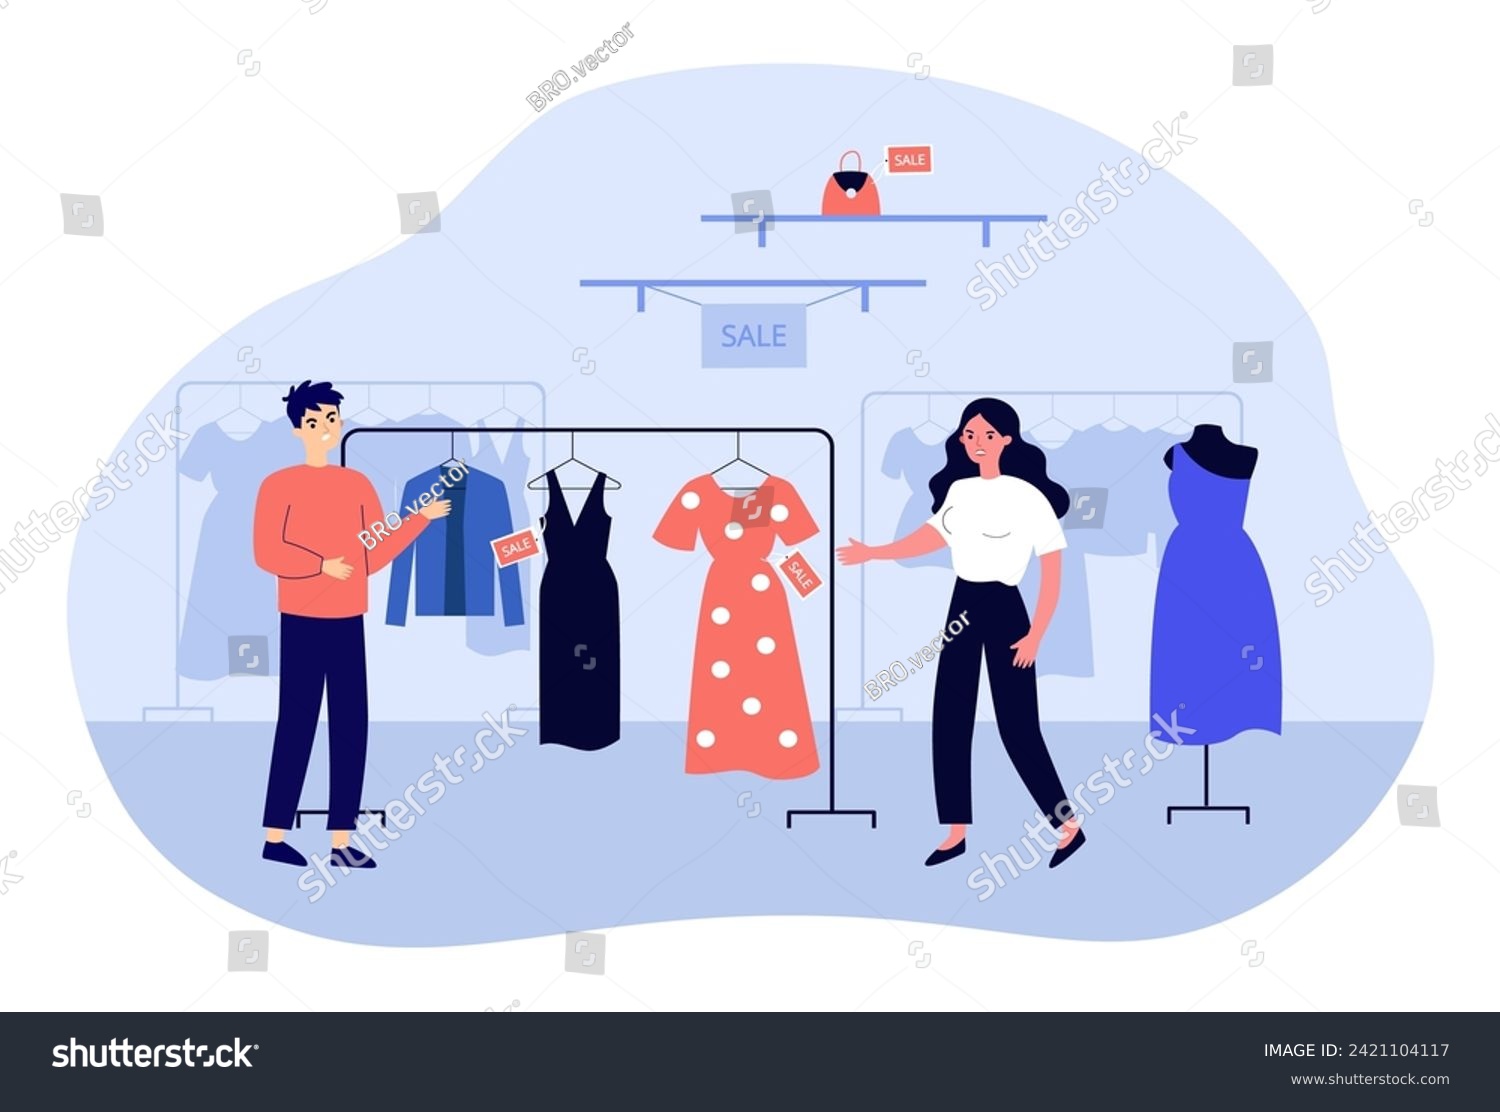 SVG of People buying less luxury and branded clothes. Unpleased man and woman looking at clothes with sale tags on hanger. Fashion, sale, shopping, decrease of consumer purchasing power concept svg